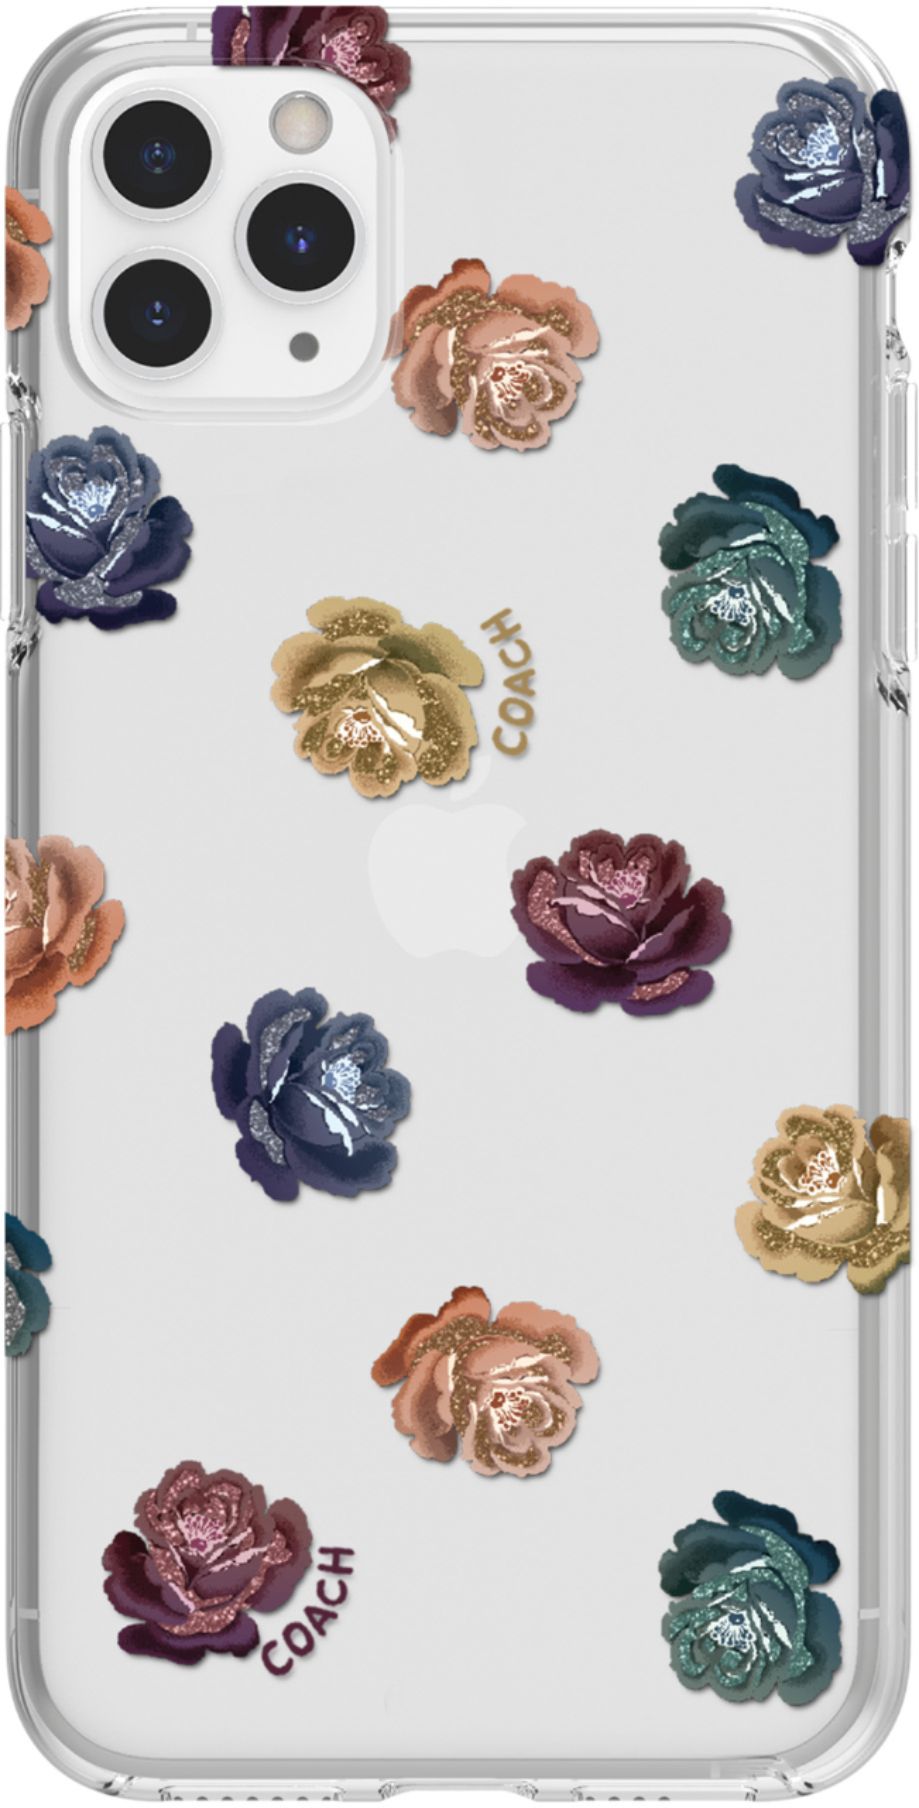 Resentimiento caballo de fuerza toca el piano Coach Dreamy Peony Protective Case for Apple iPhone 11 Pro Max  Clear/Rainbow/Glitter CIPH-003-DPRNB - Best Buy